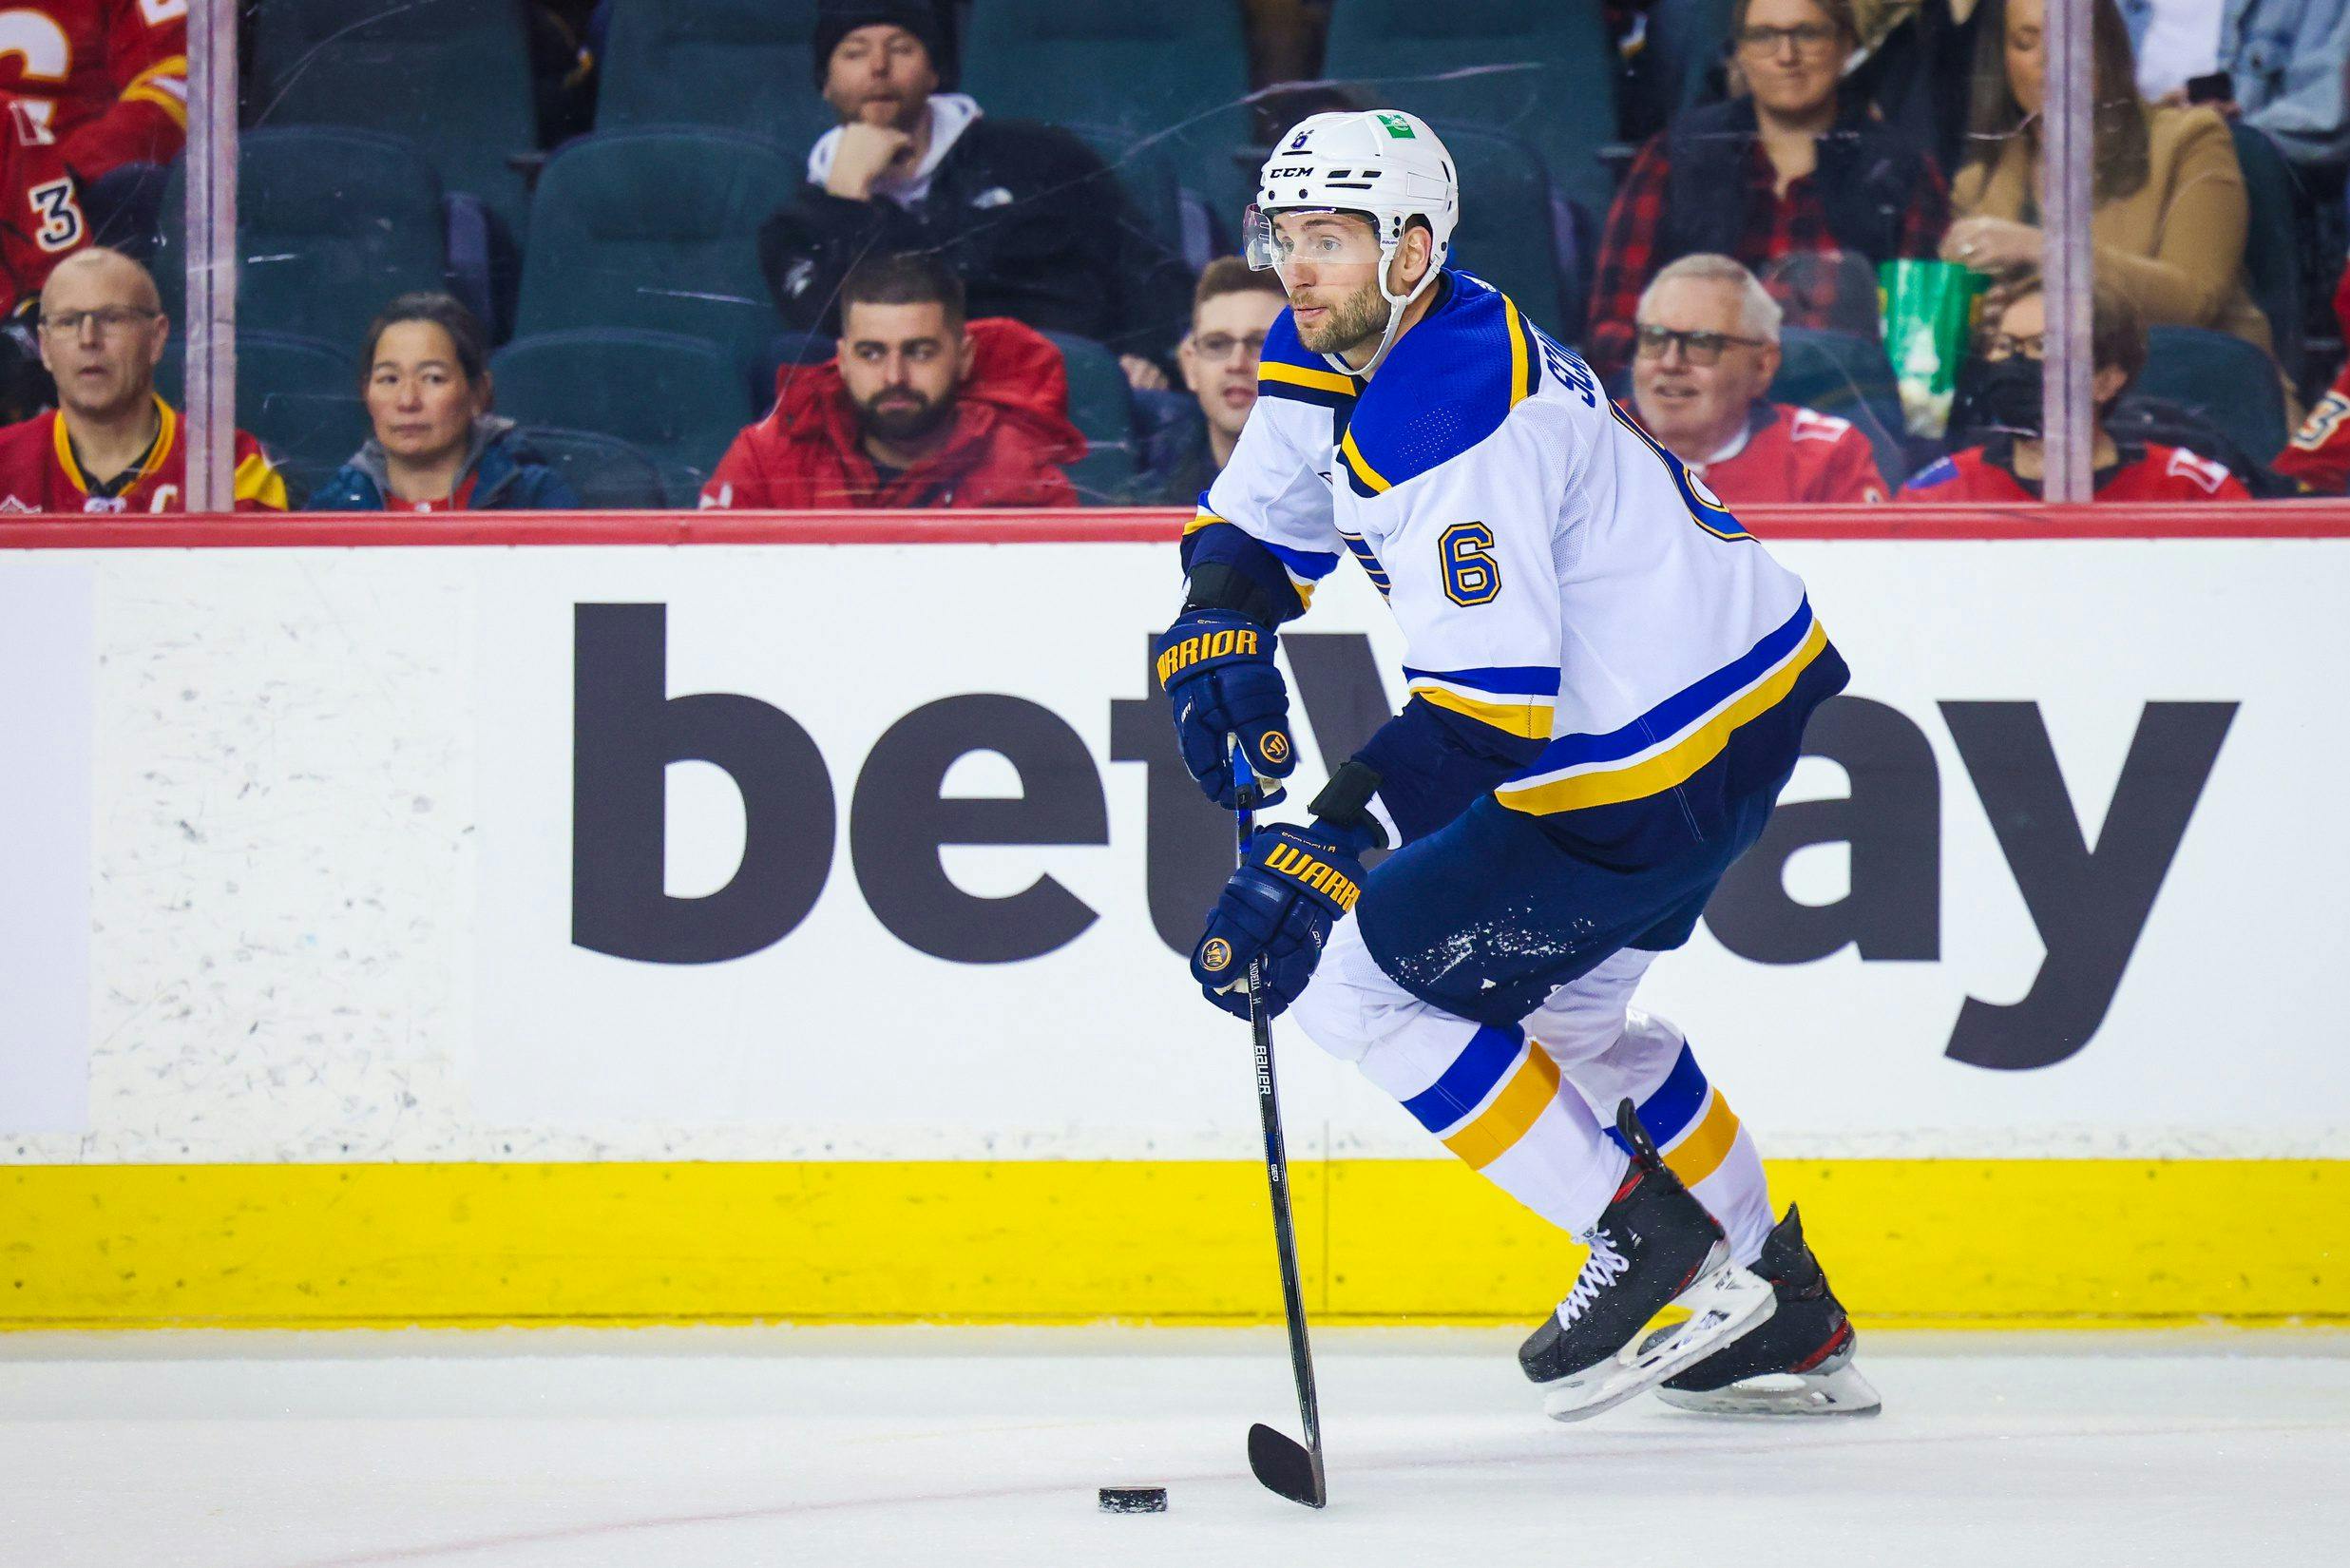 St. Louis Blues’ Marco Scandella to miss at least 6 months after hip surgery